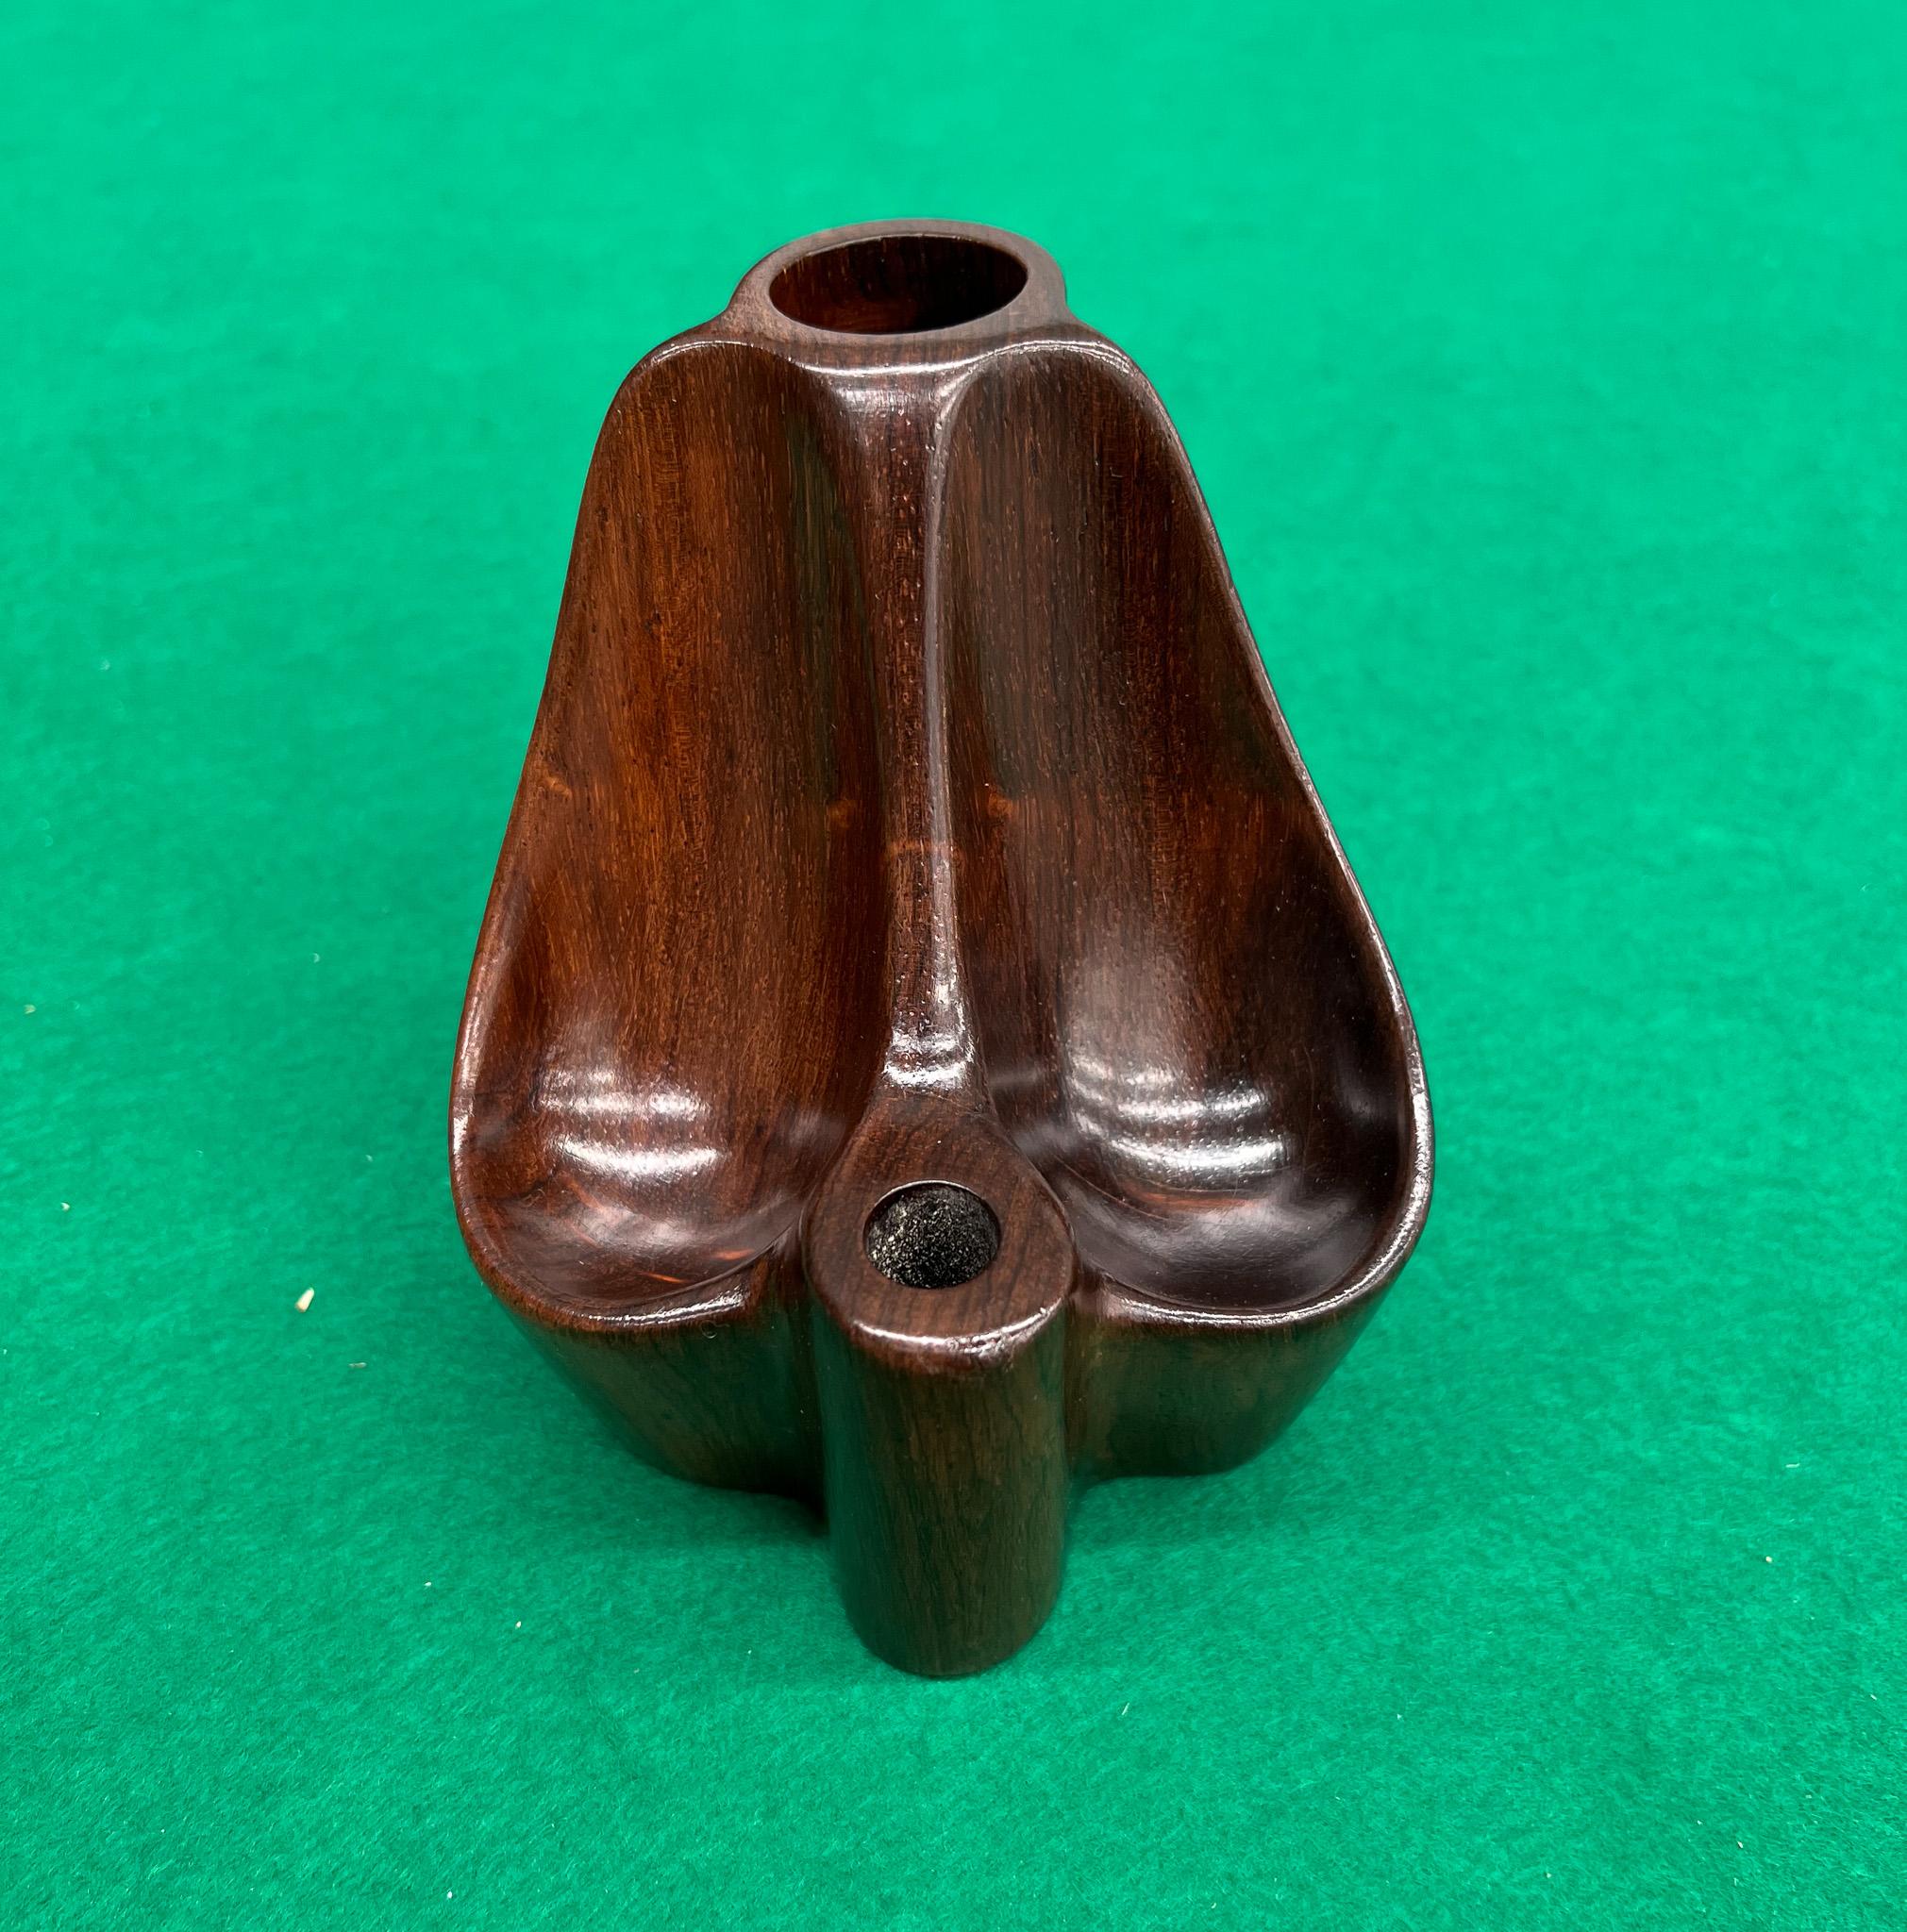 This Brazilian mid-century modern decorative pipe holder was designed by Jean Gillon for WoodArt in the sixties. Handcrafted with hard rosewood (also known as jacaranda), the pipe holder has clean lines with elegant curves. The rosewood has a deep,